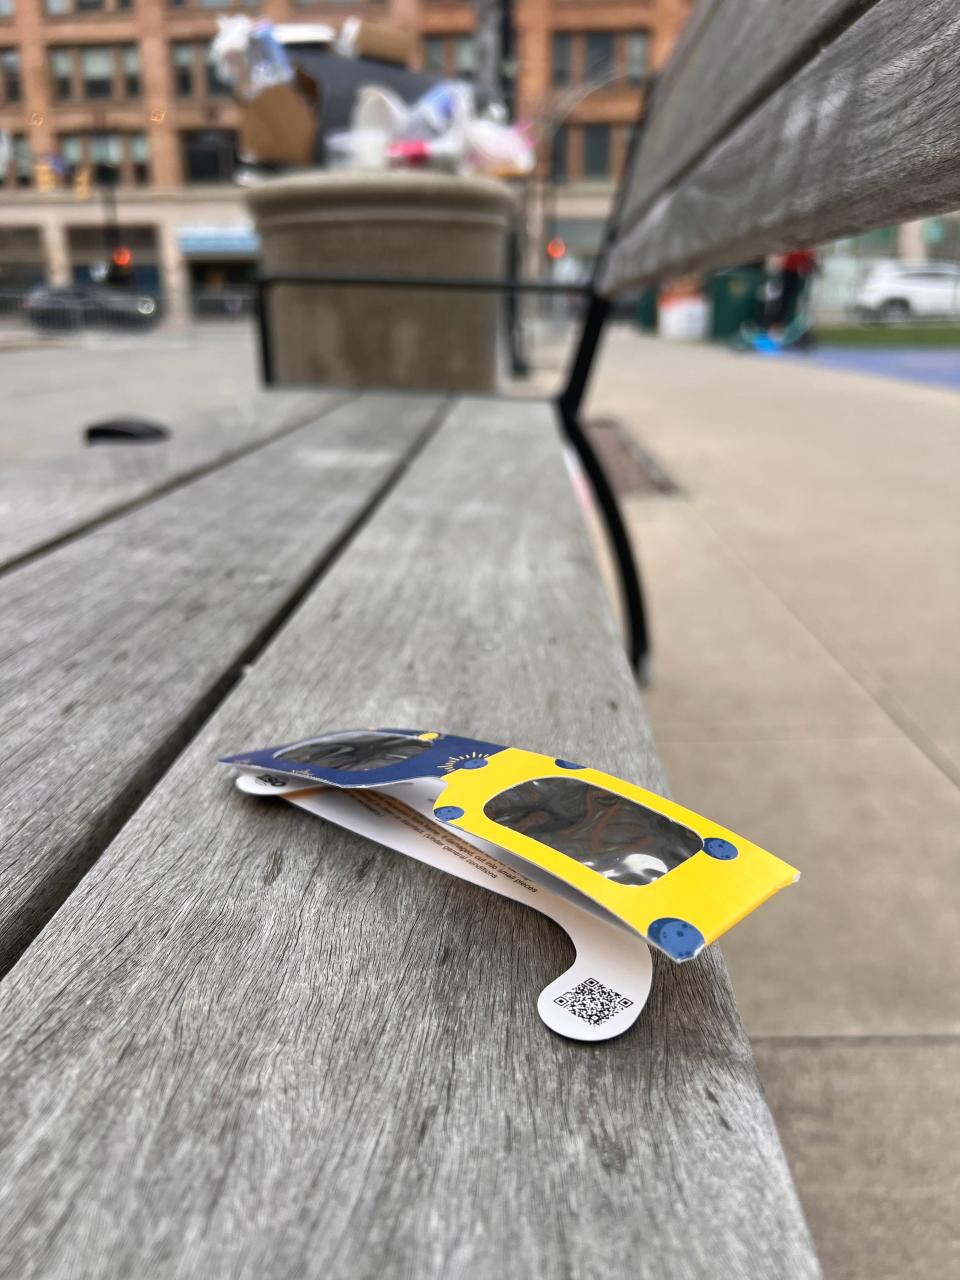 A pair of solar glasses lay discarded on a bench on Parcel 5 Monday. Because of the cloud cover in Rochester, the glasses were uneccesary.